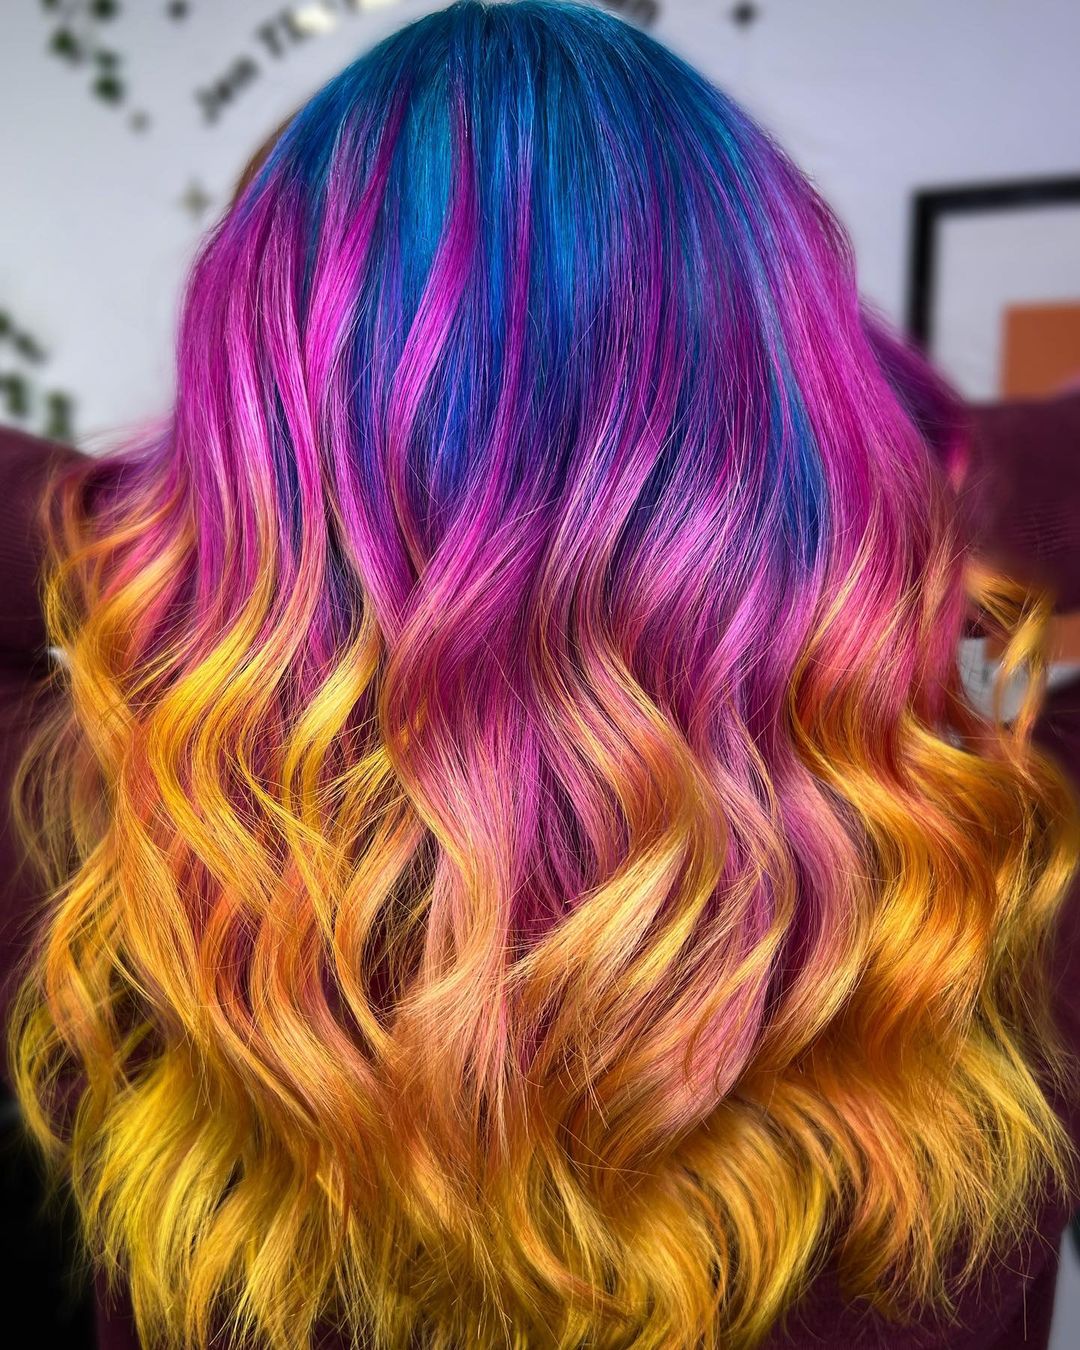 Galaxy Sunset Ombre on Shoulder-Length Curly Hair